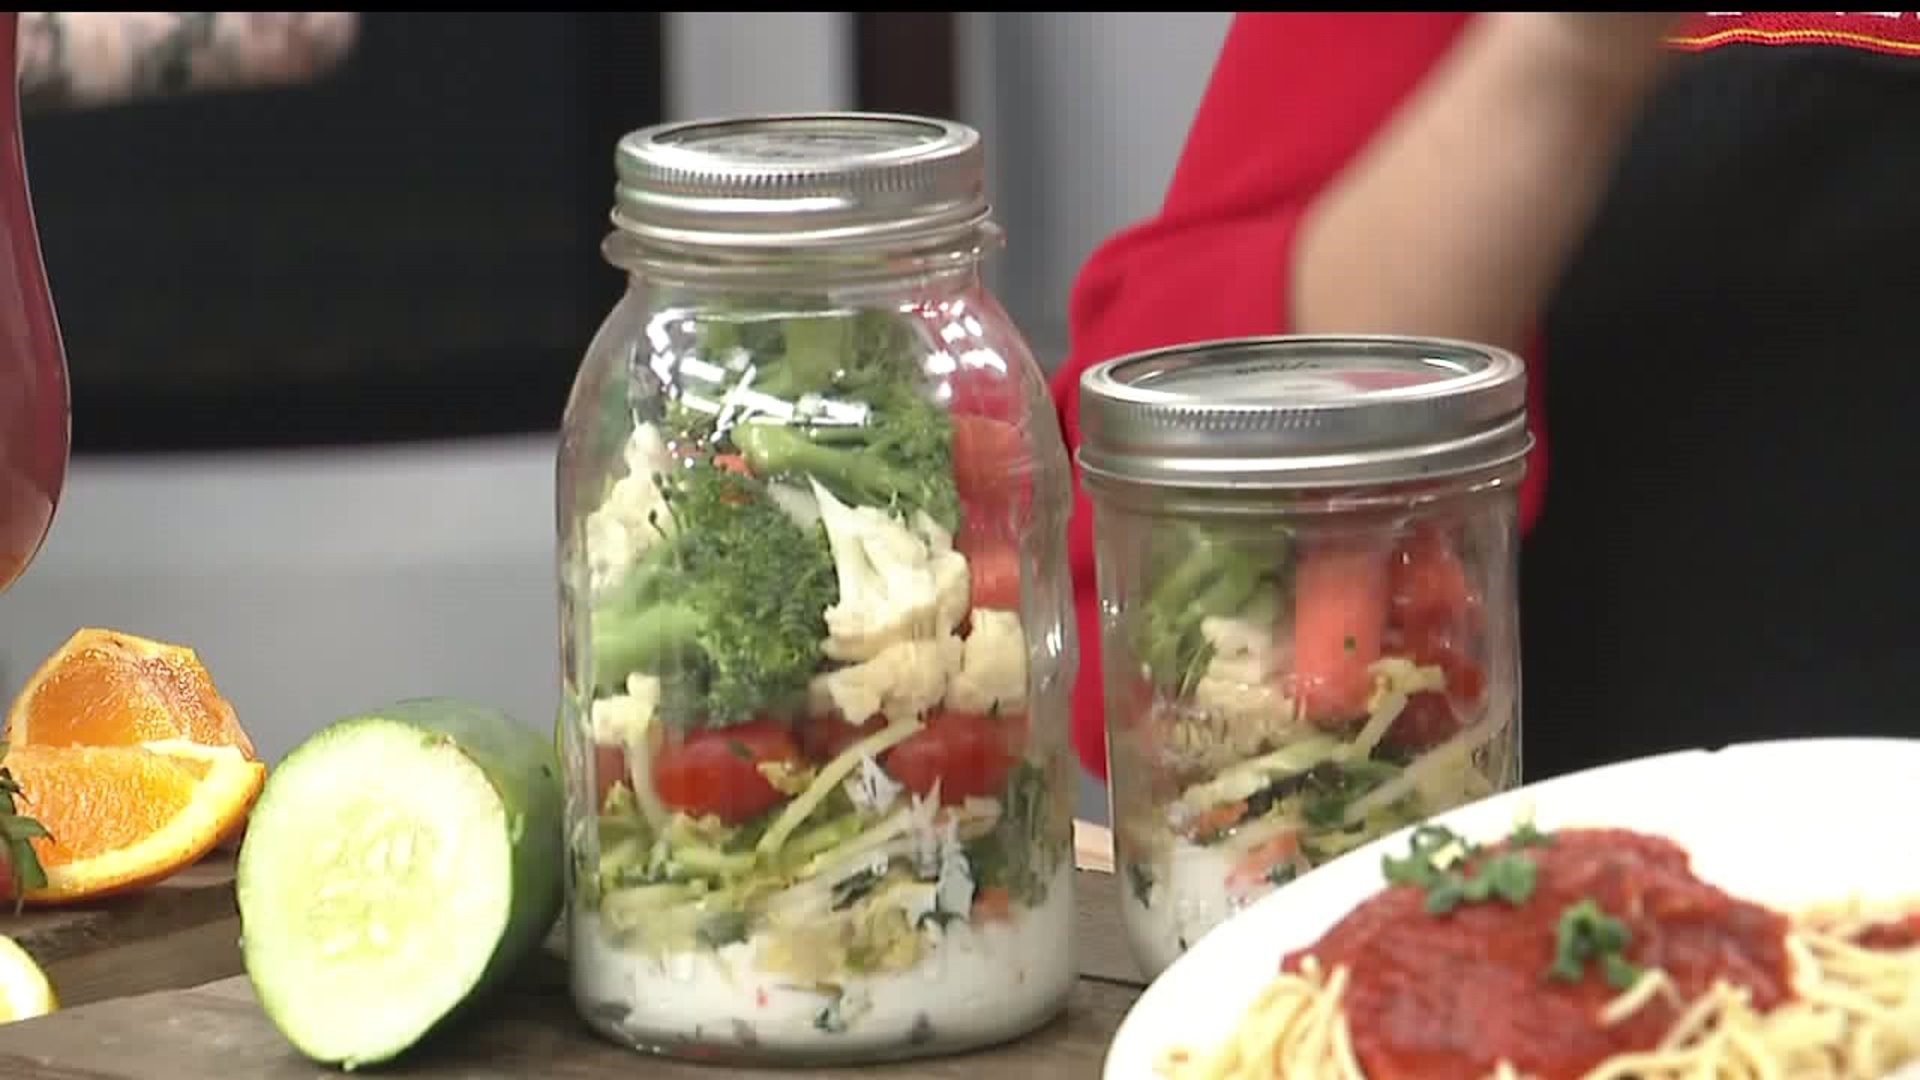 In the Kitchen with Fareway: Drink/Eat Your Veggies!